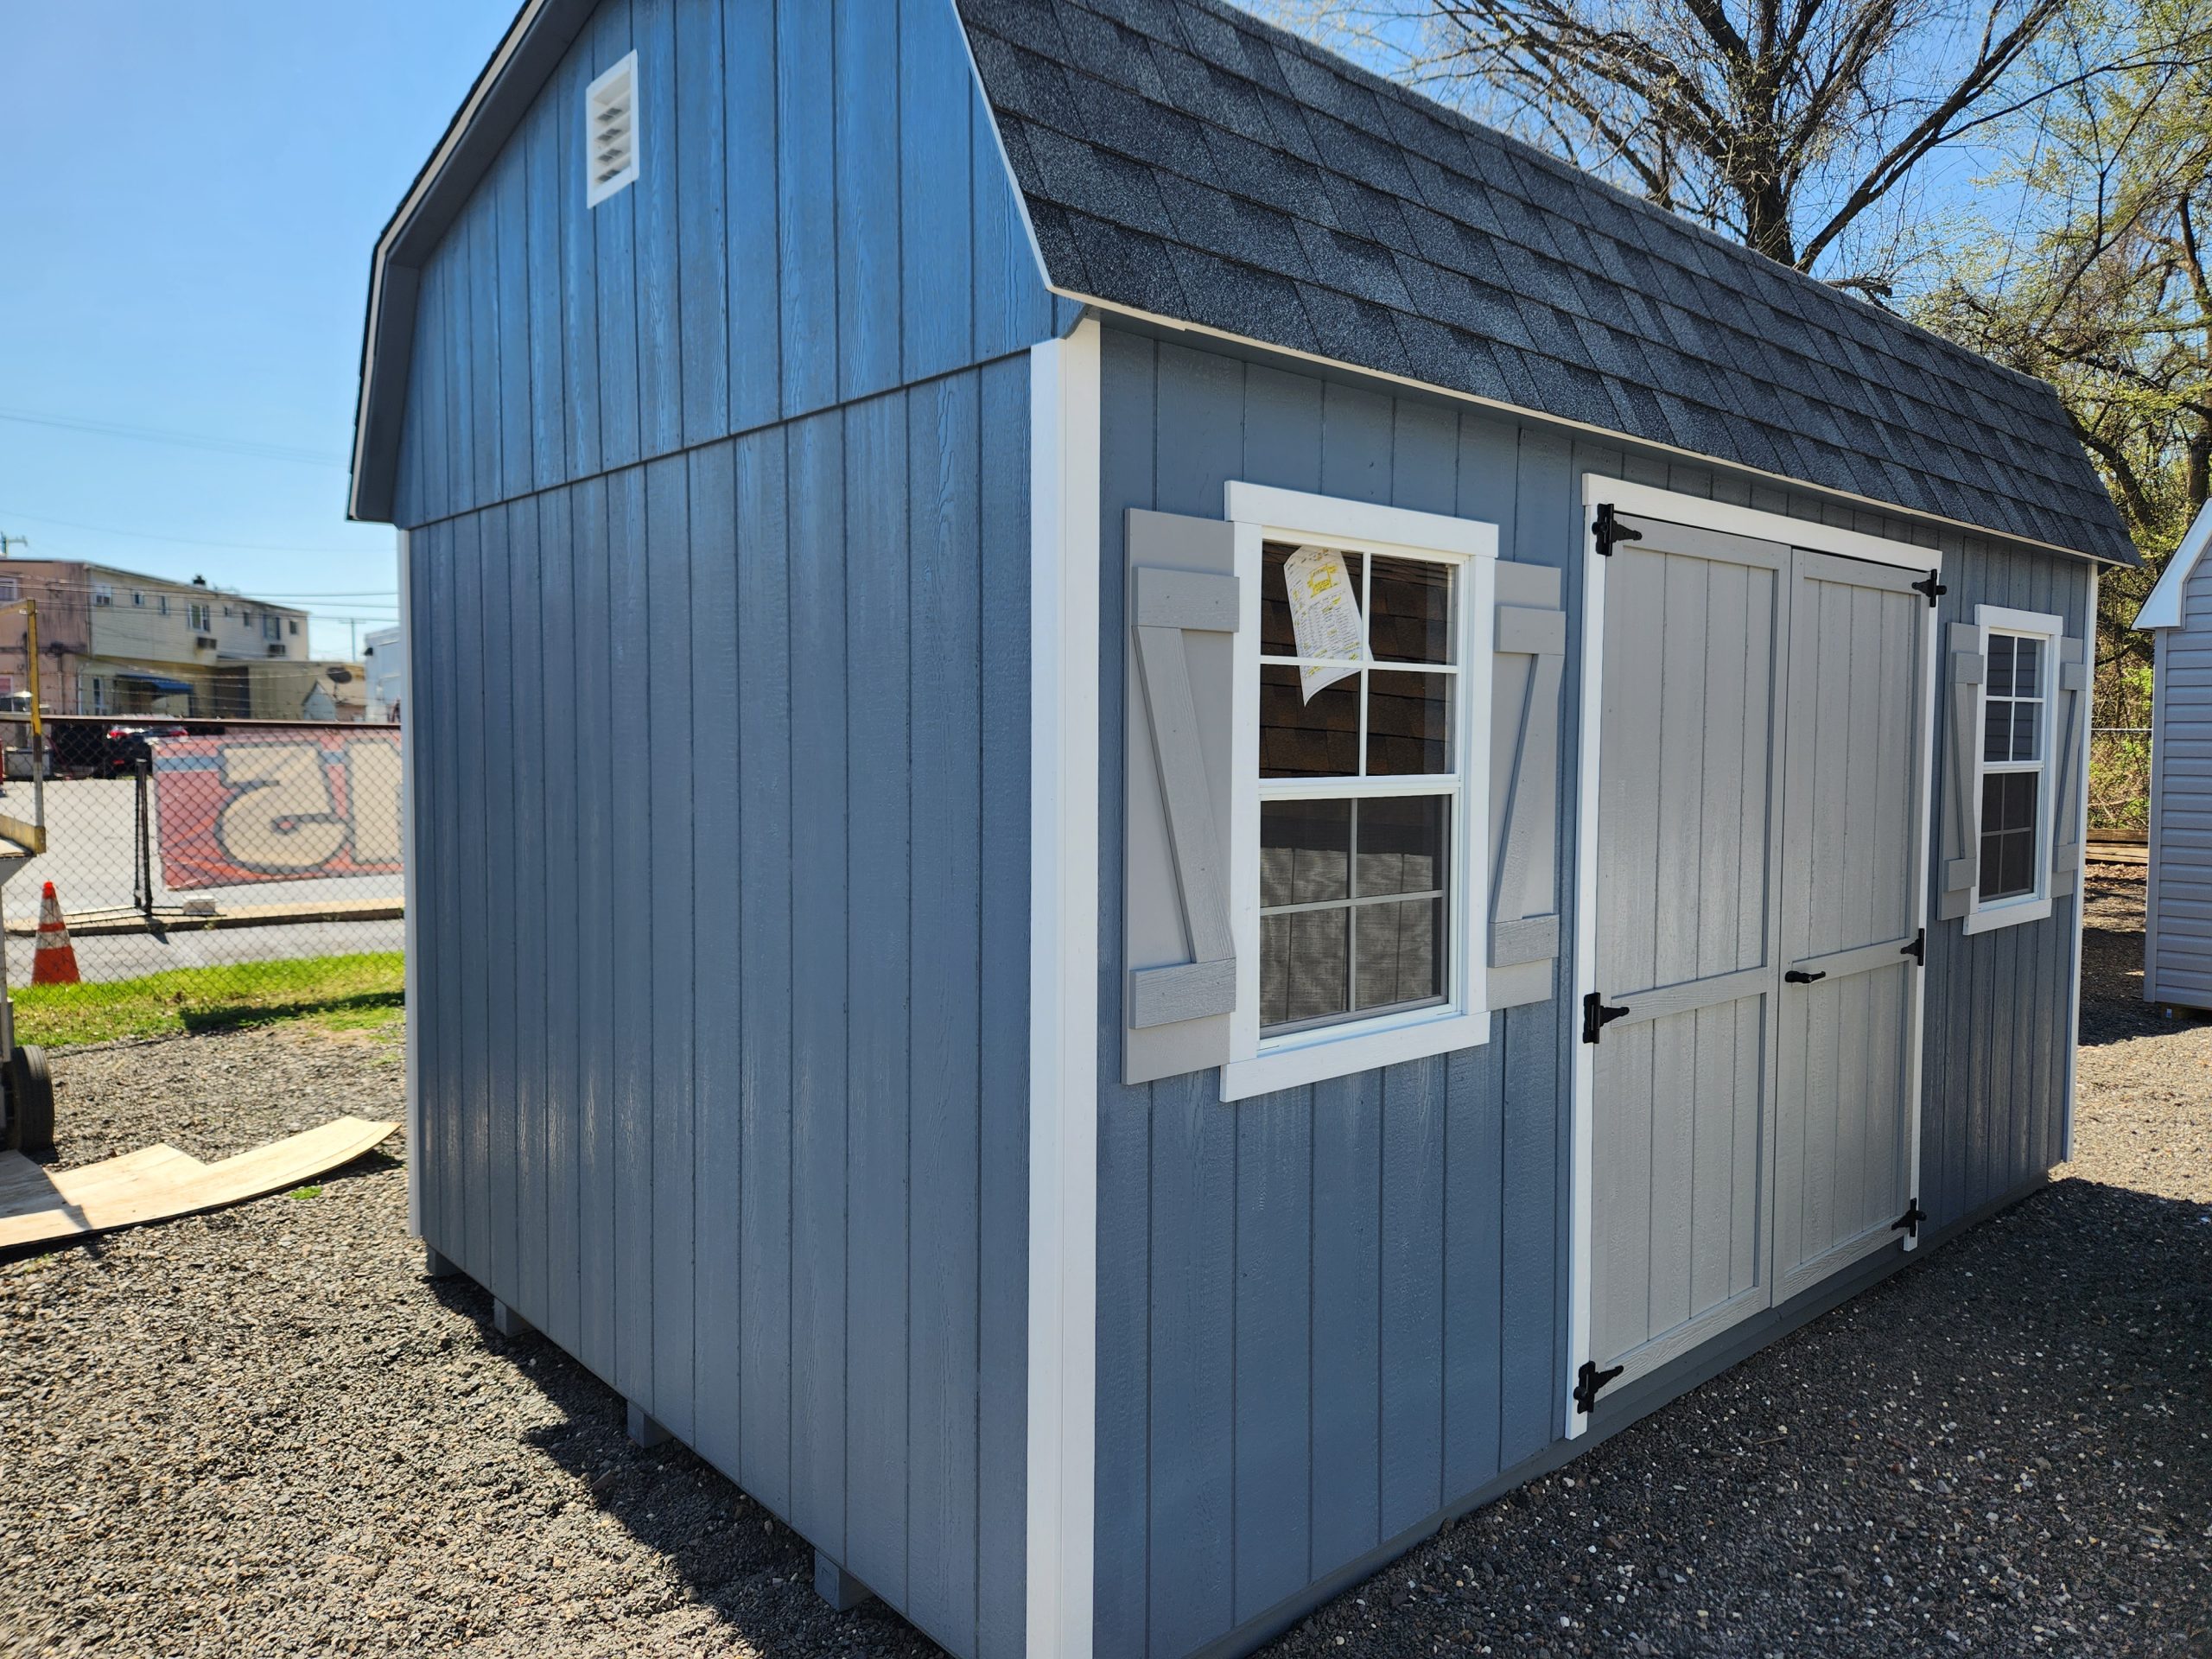 #27-23  10x16 painted woid DB W7' walls, Zshutters and lofts , $6483